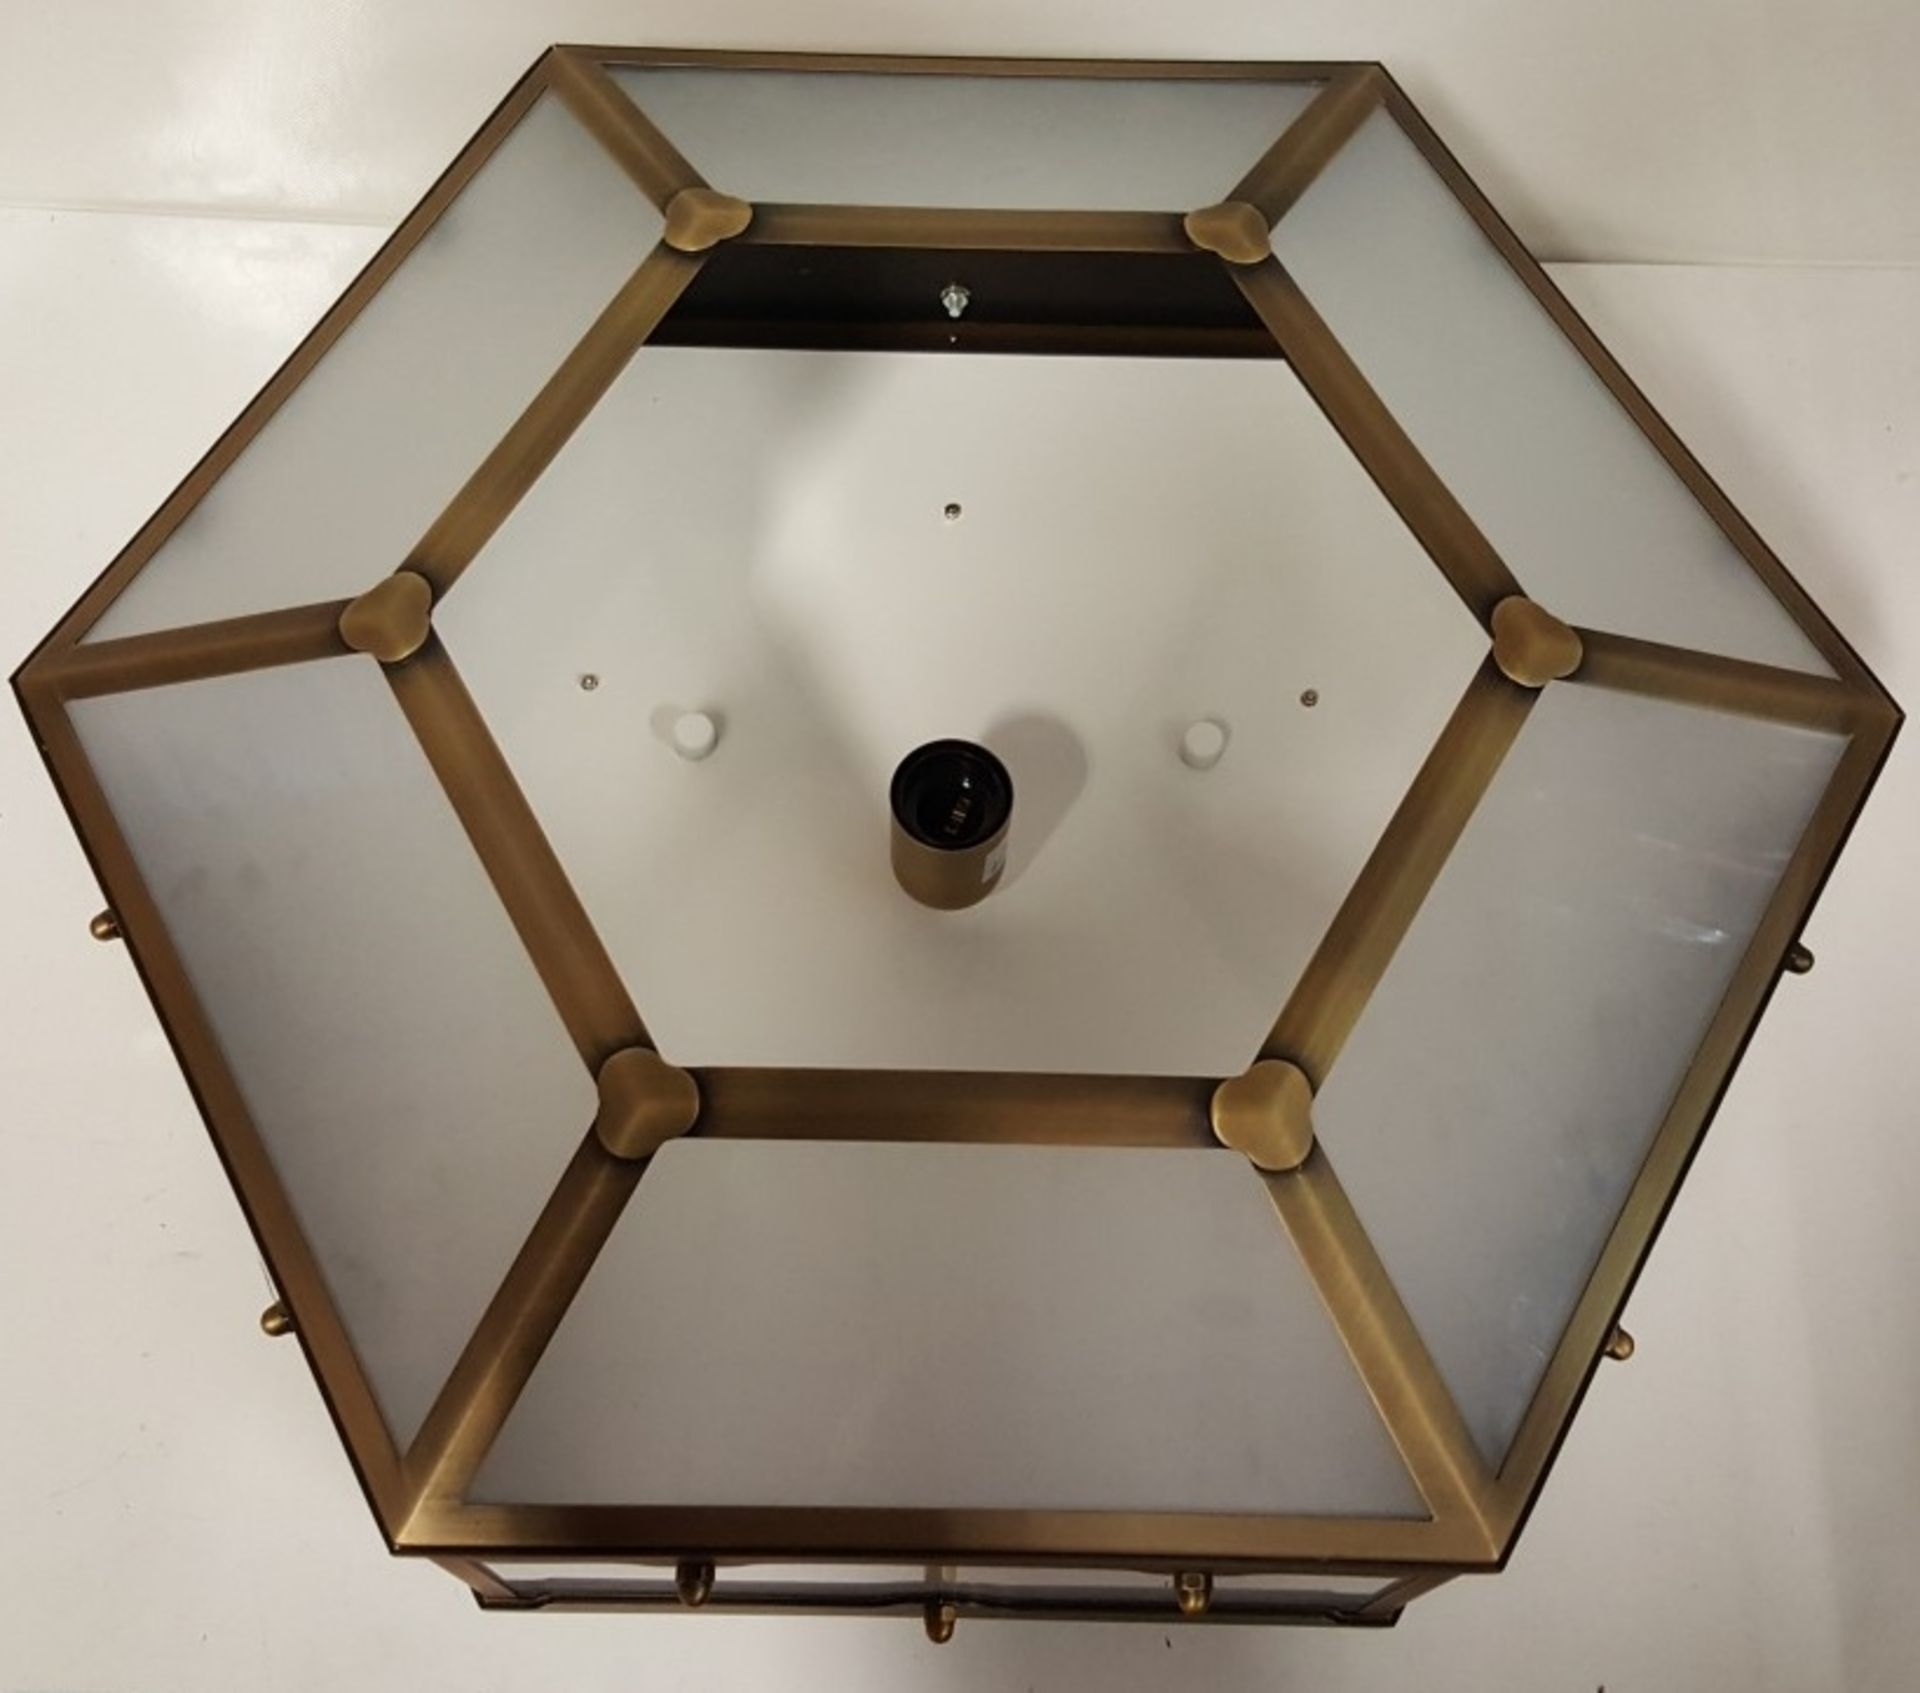 1 x Chelsom Flush Fitting Hexagonal Shaped Light Fitting In A Antique Brass Finish - REF:J2374 - Image 3 of 7